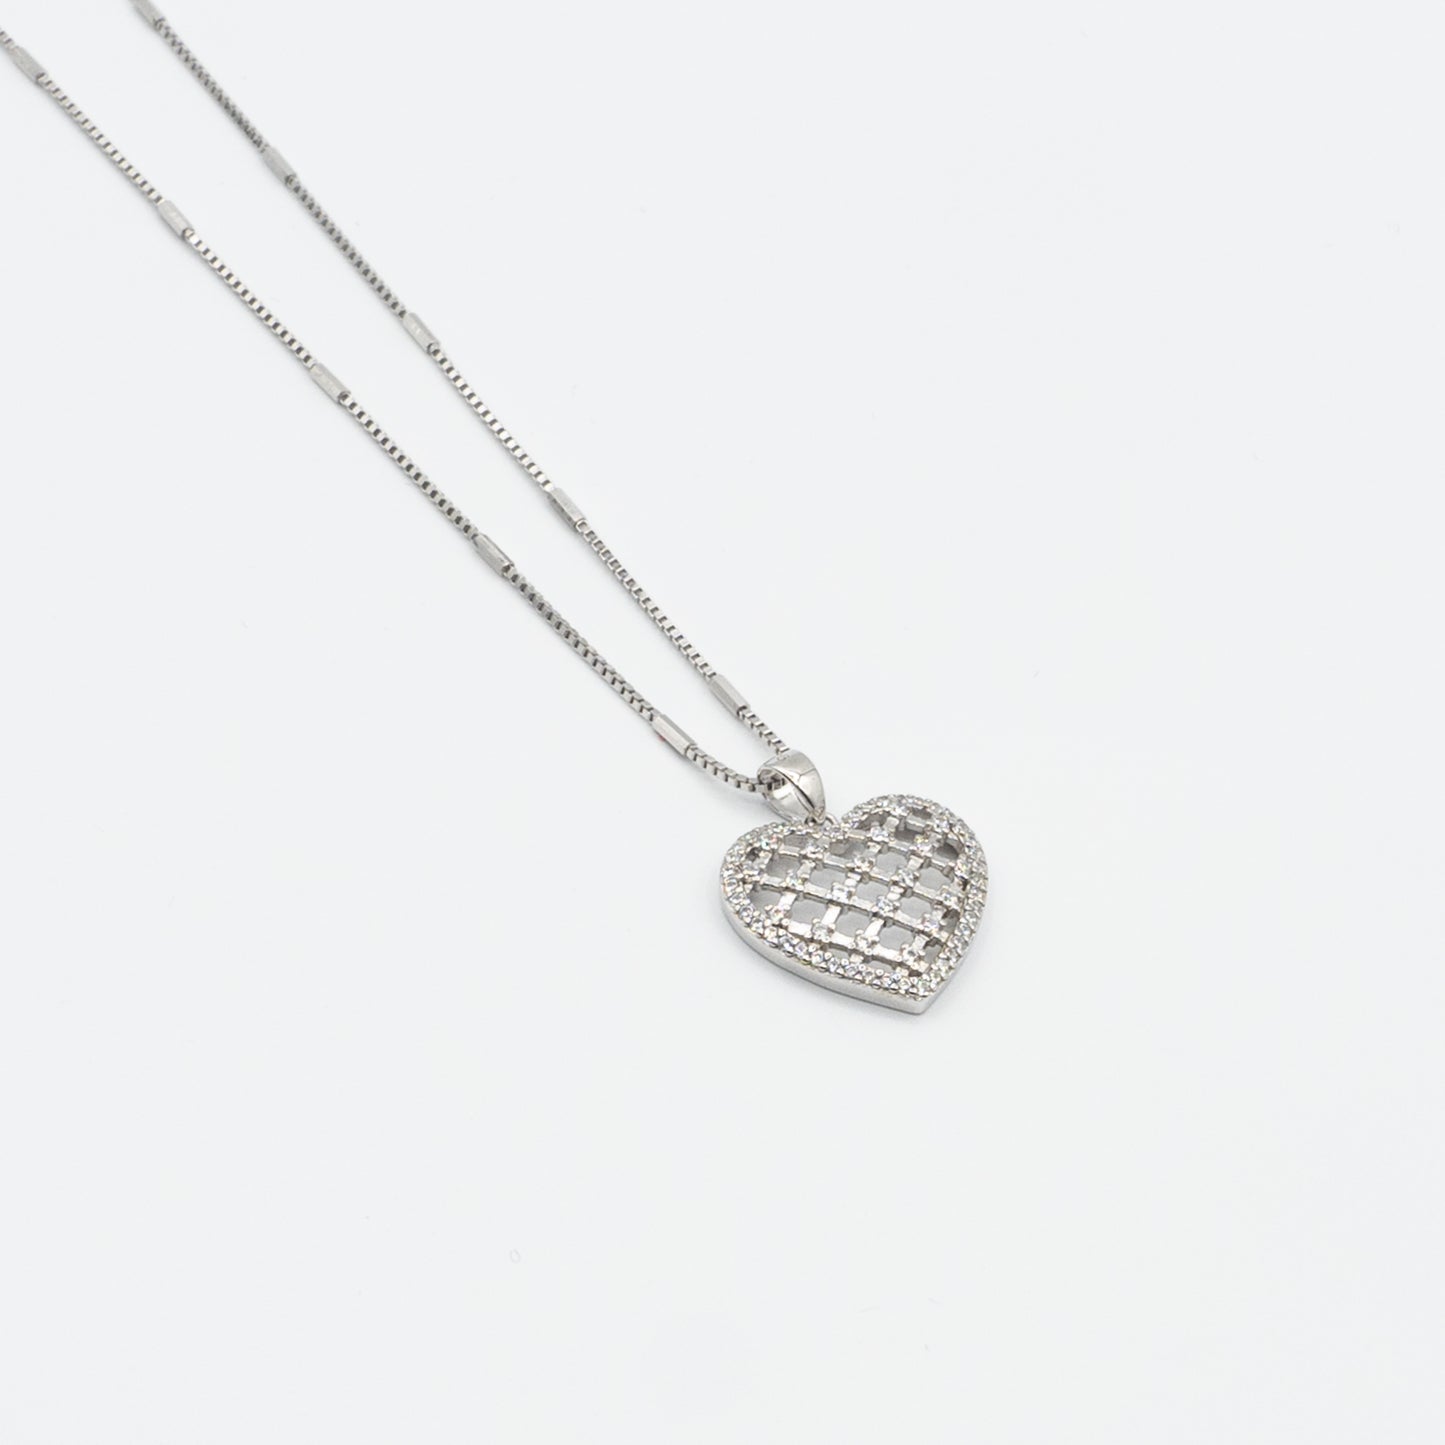 GEO- sterling silver heart necklace